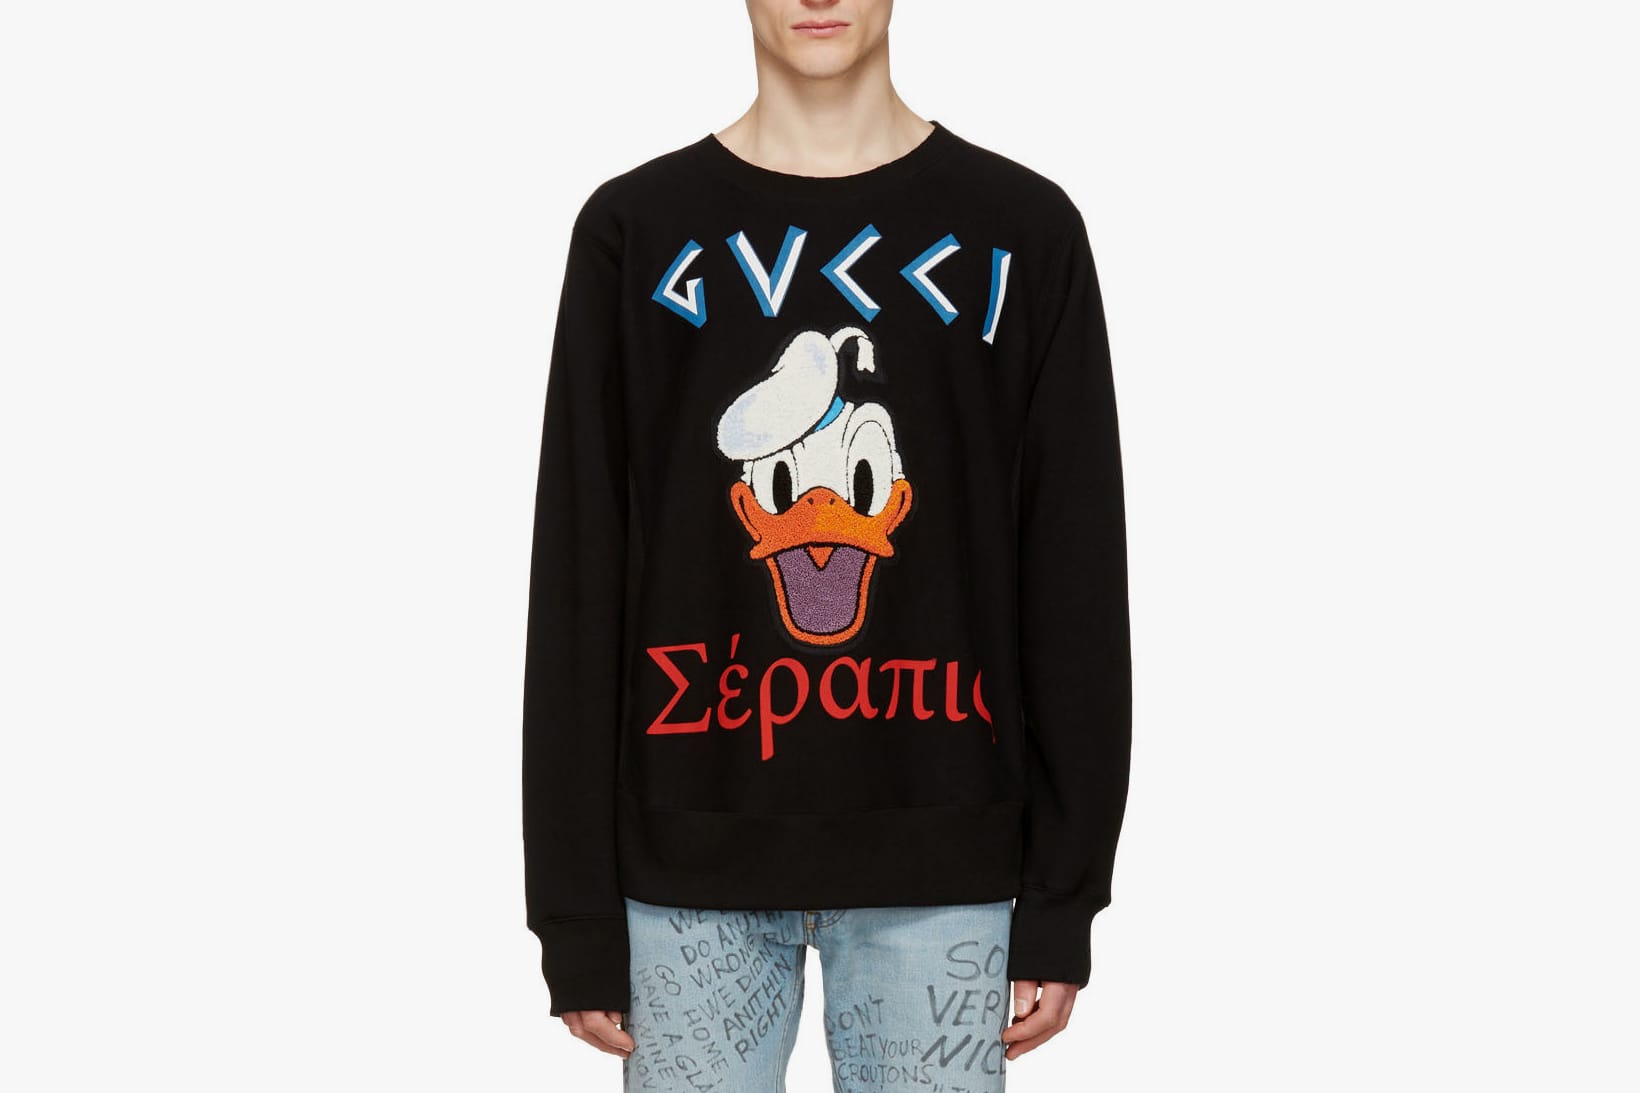 donald duck red sweater